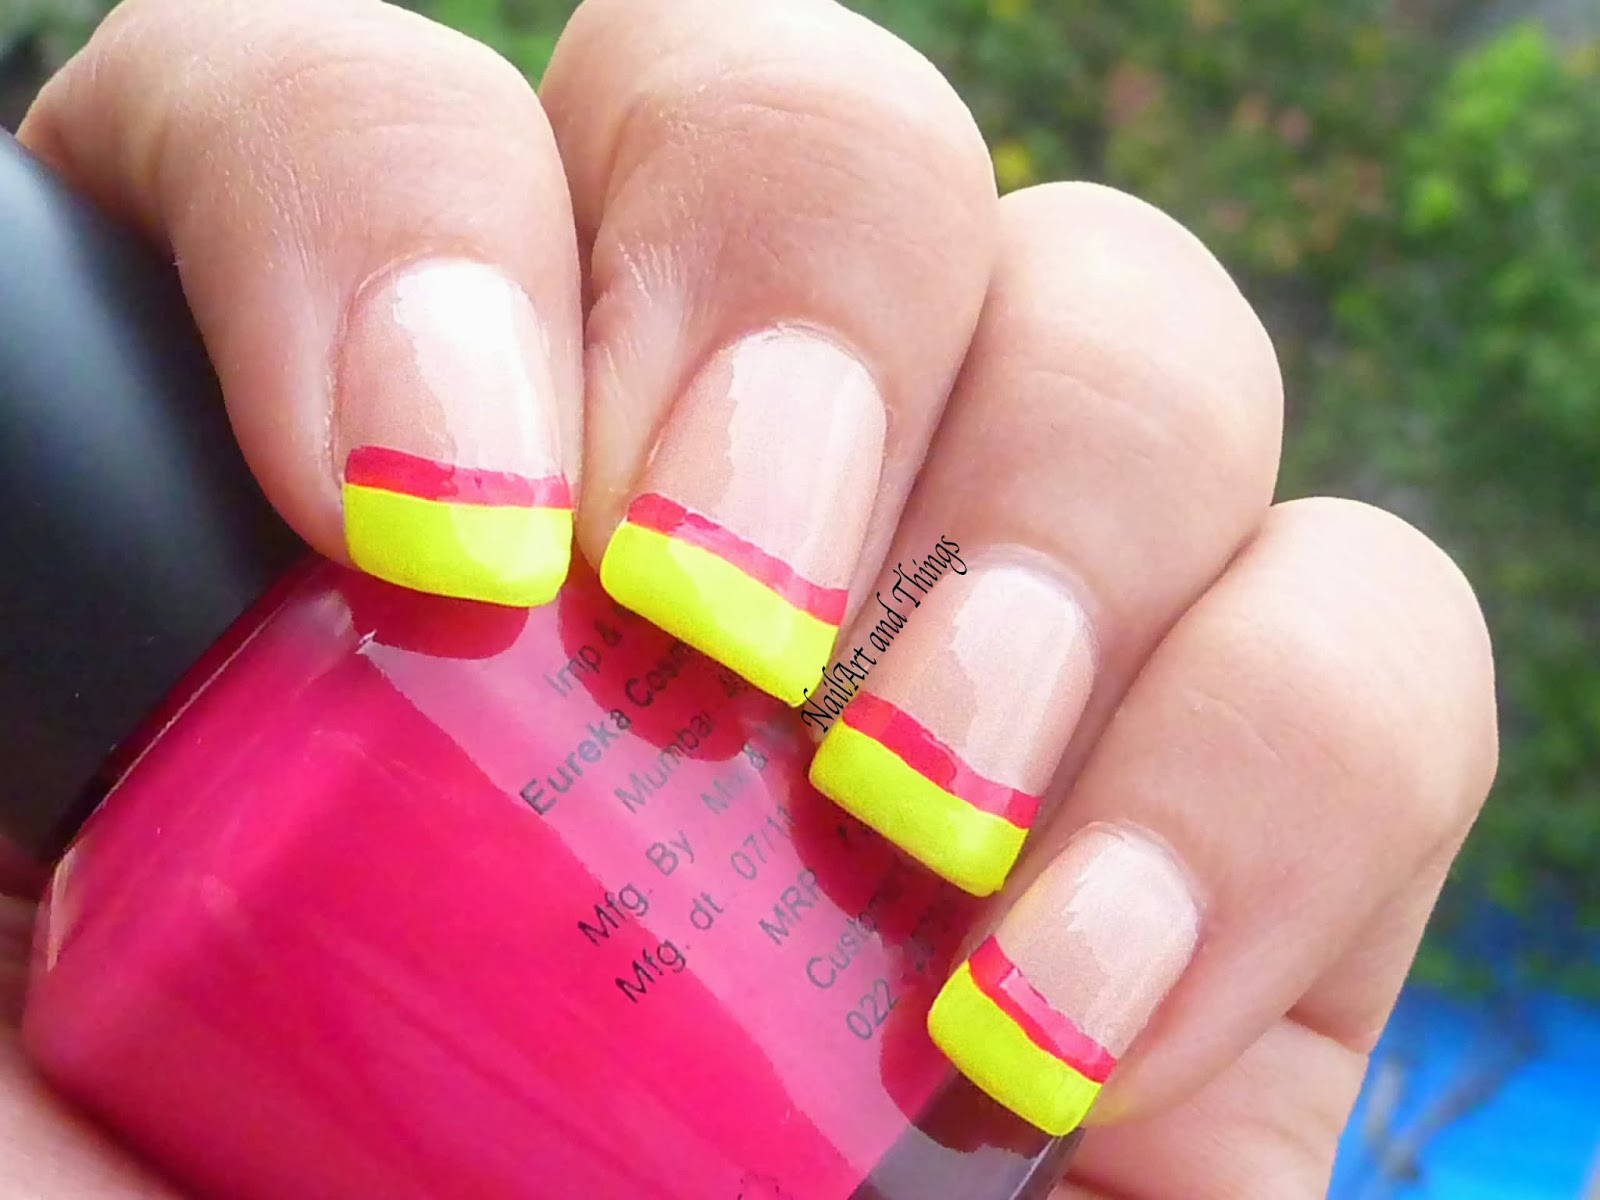 Neon Striped Nail Art: Fun and Playful Designs to Try - wide 2